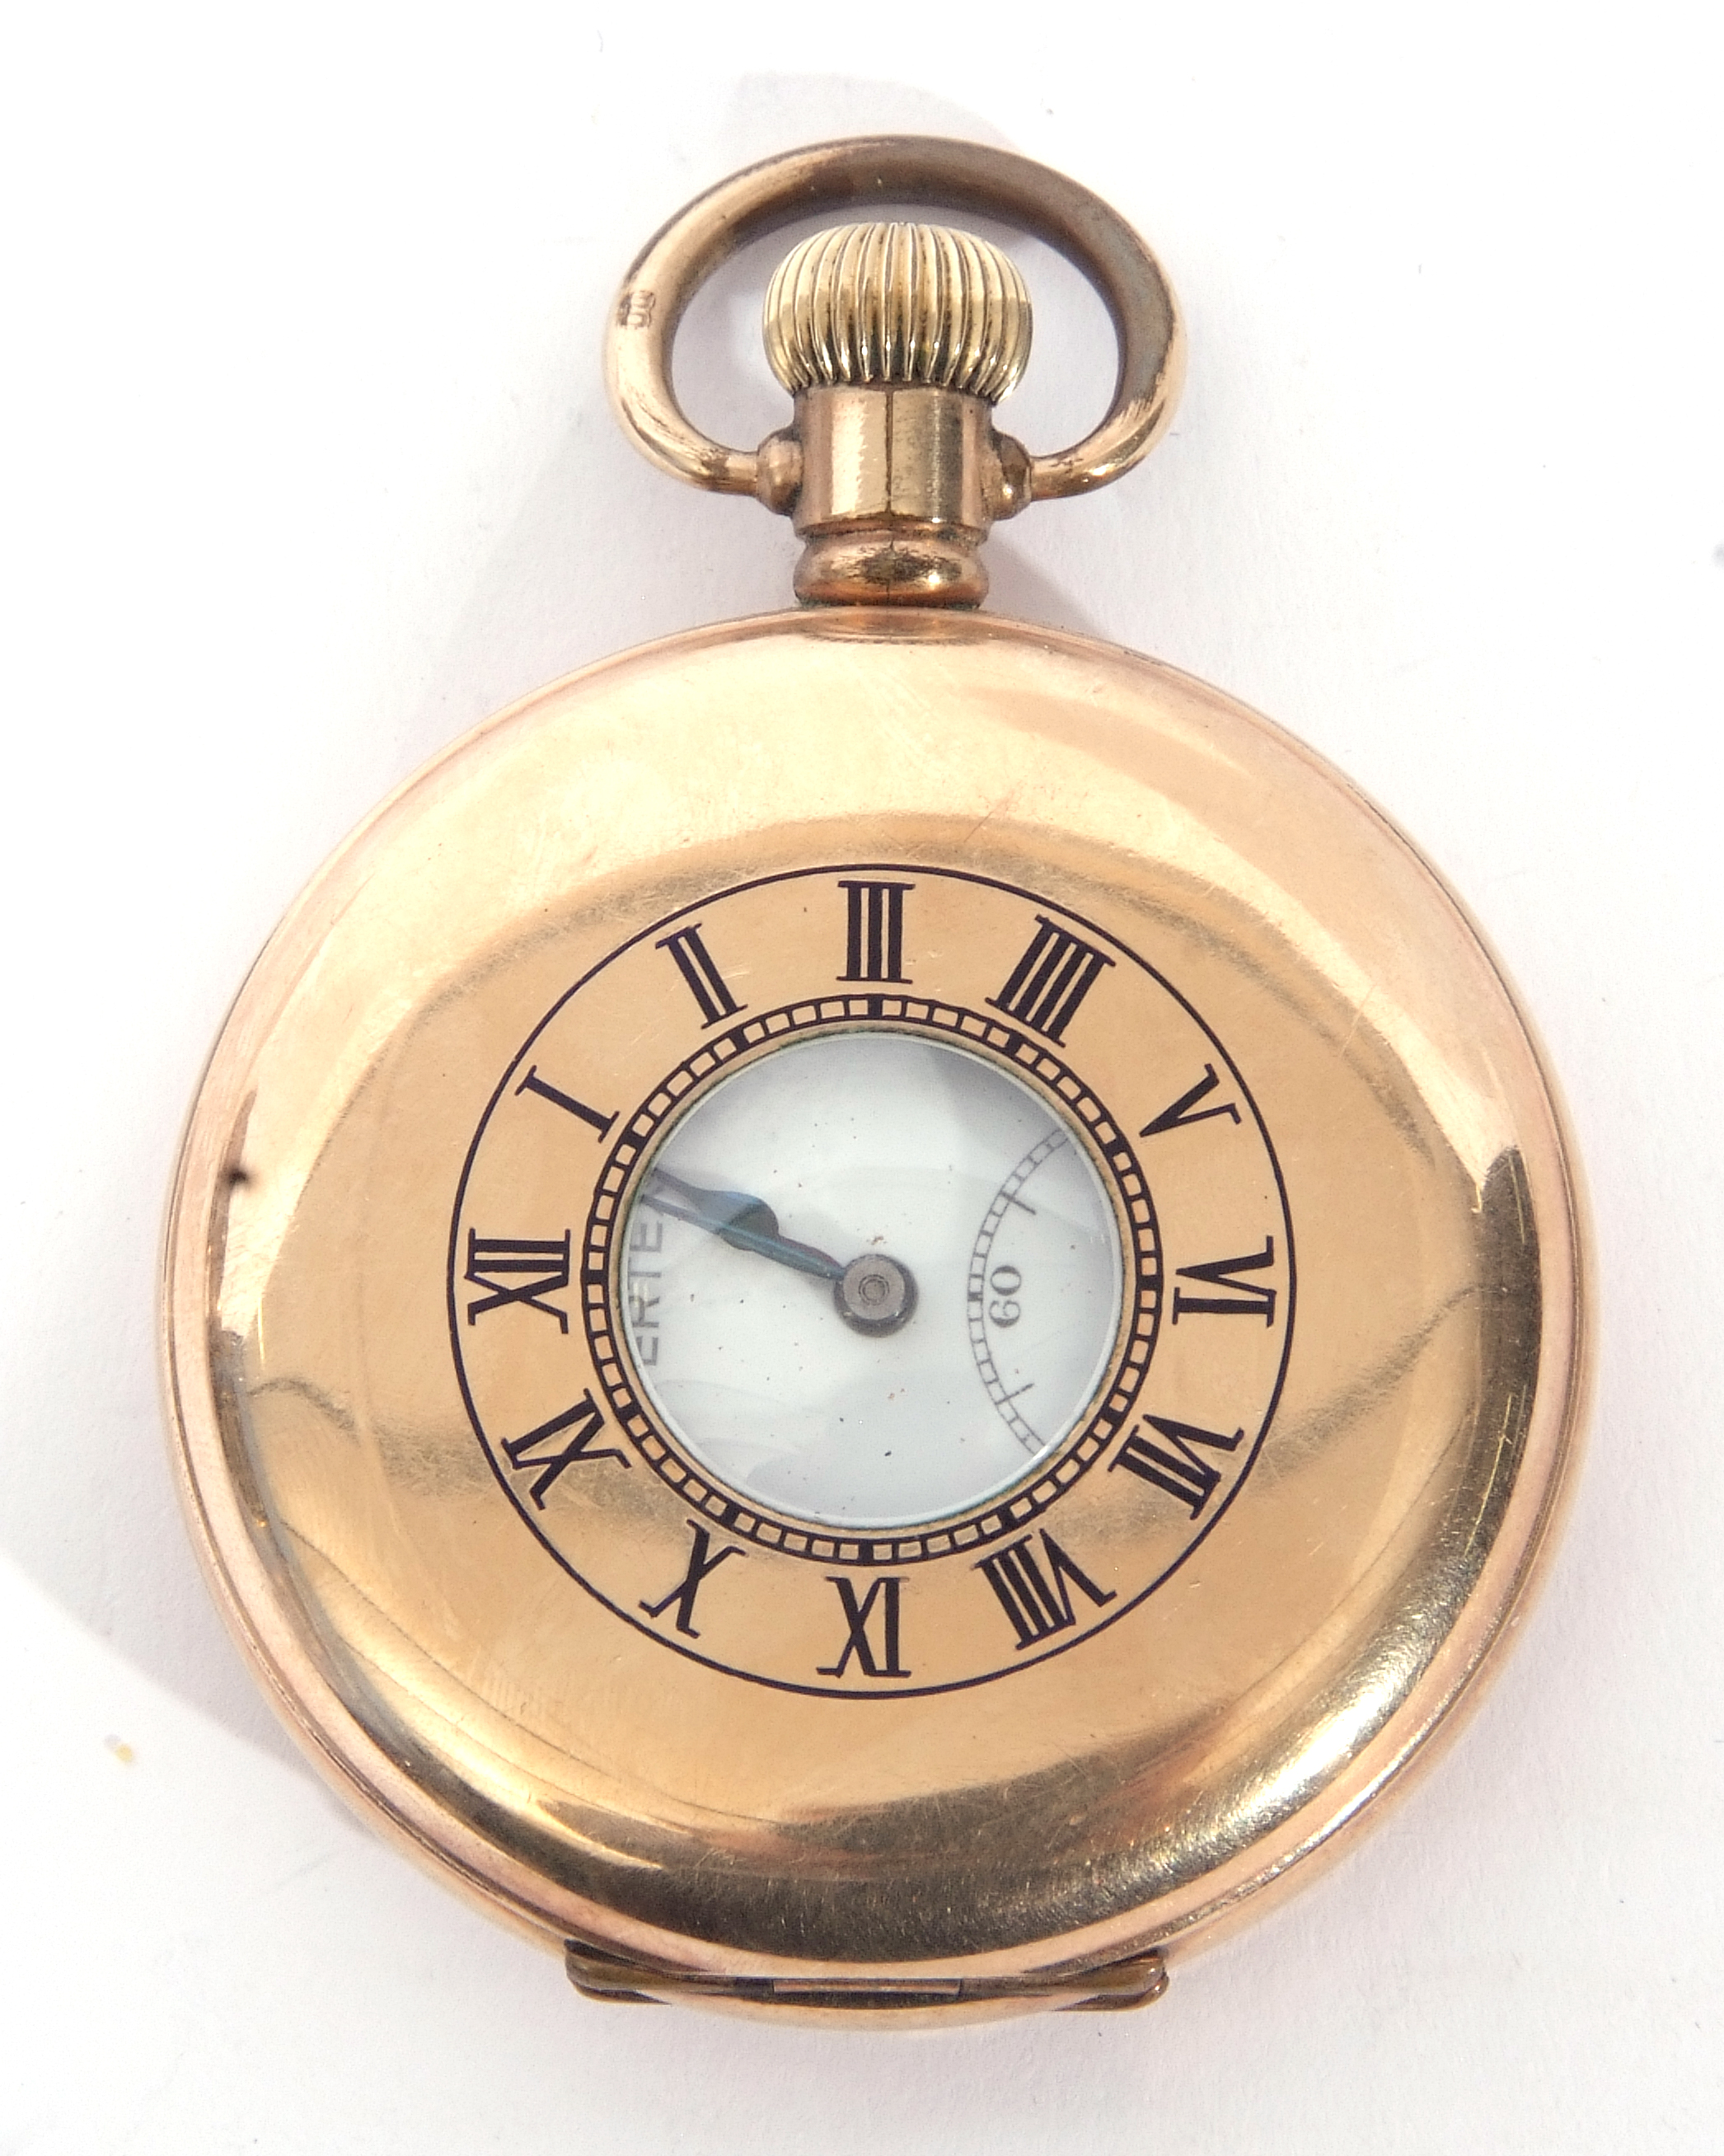 Gents first/second quarter of 20th century gold plated presentation half-hunter pocket watch, the